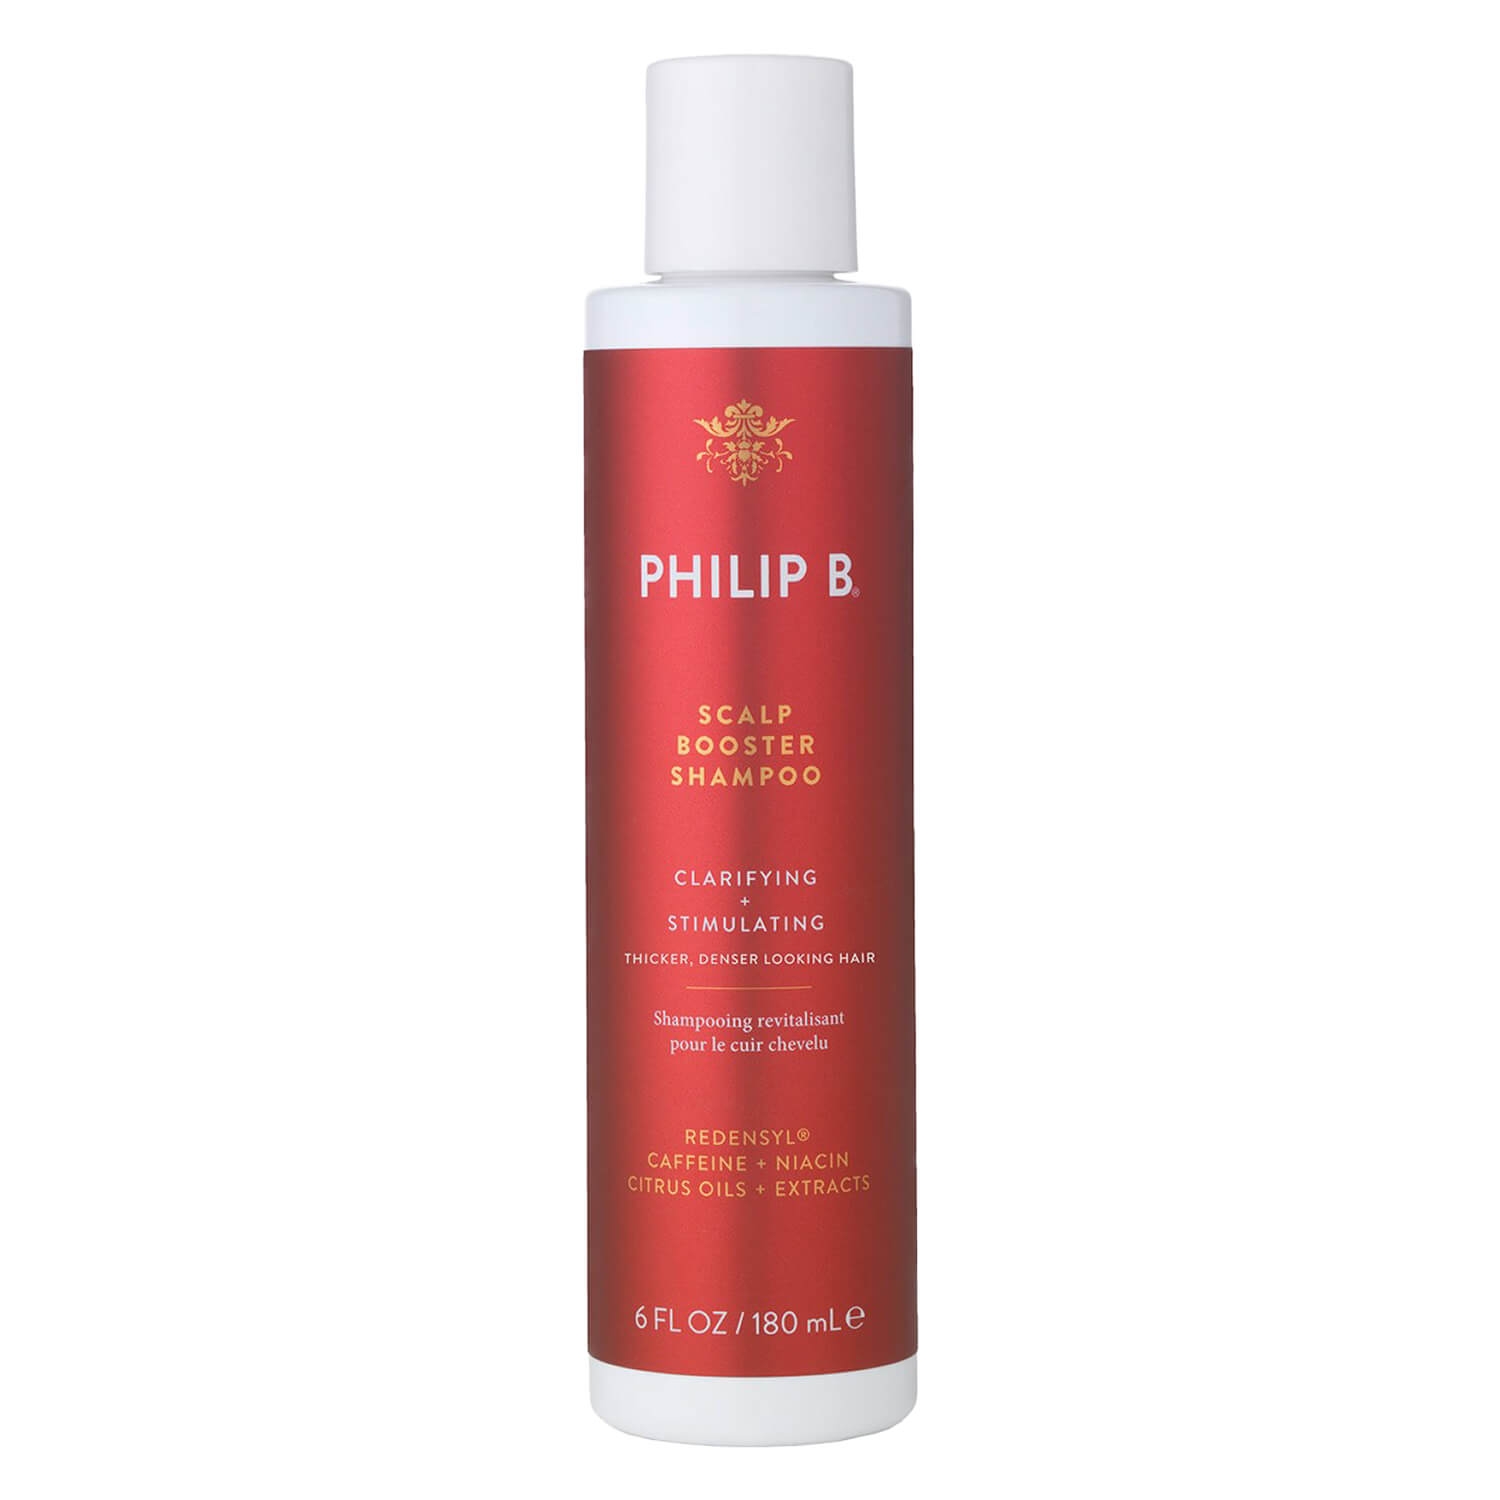 Product image from Philip B - Scalp Booster Shampoo